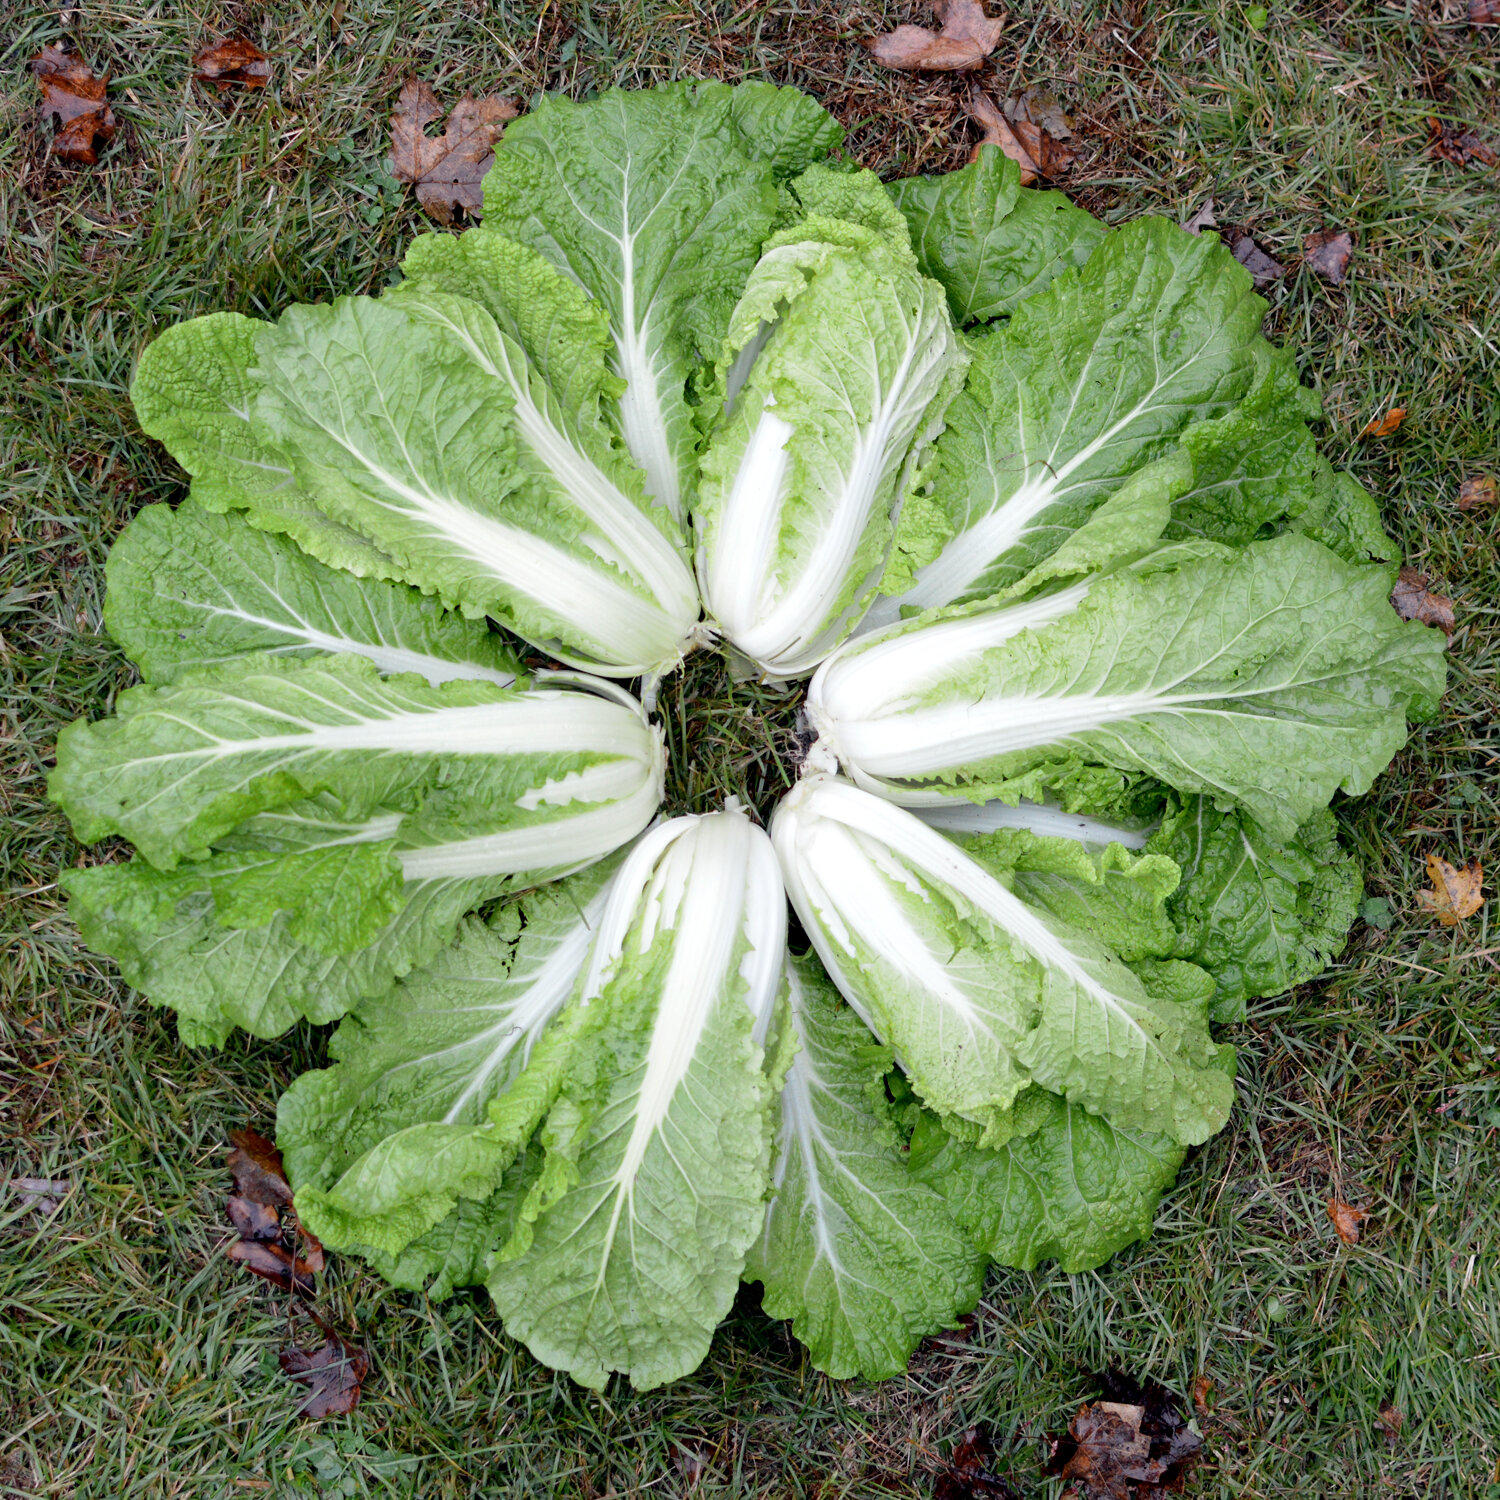  Chinese Cabbage. I can’t help myself making art out of it. 